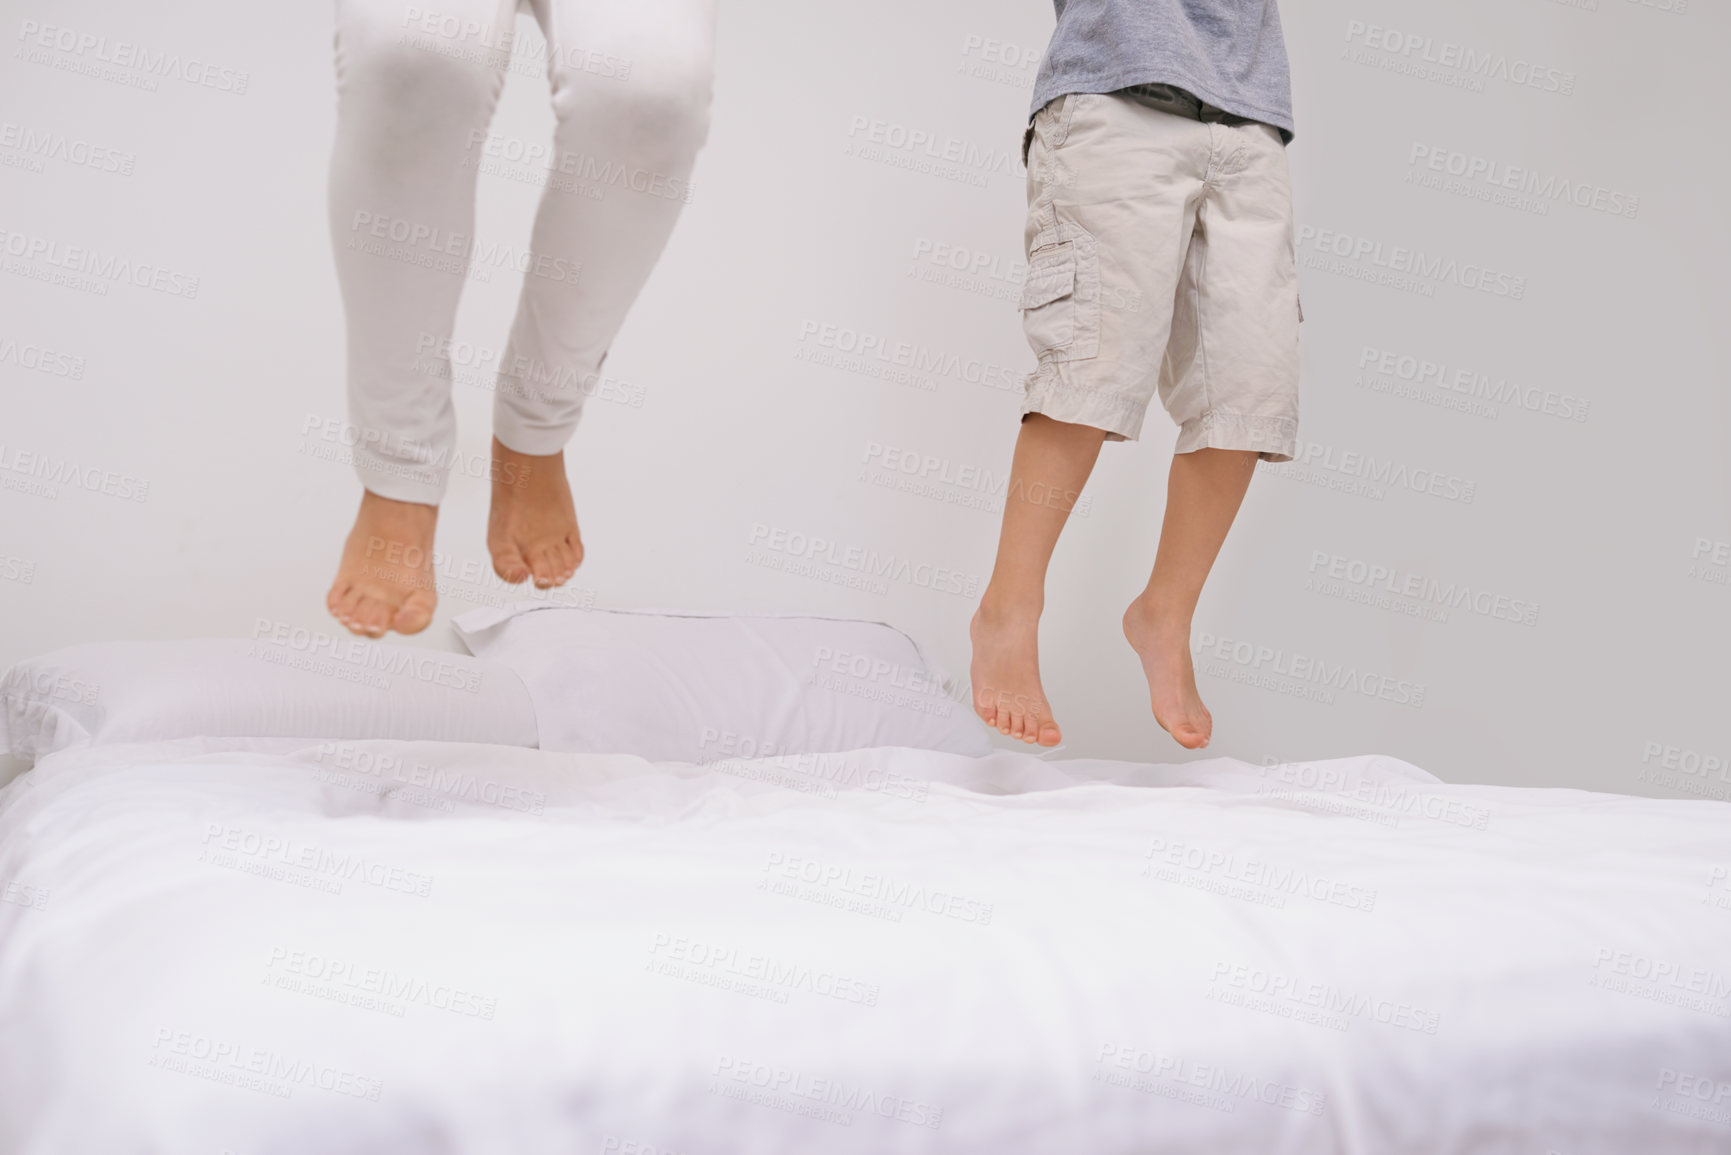 Buy stock photo Jumping, bed and kids with legs, energy and morning in a bedroom with game and feet. Youth, sibling and home with a excited child on duvet in air with crazy play, leap and fun in house with friends